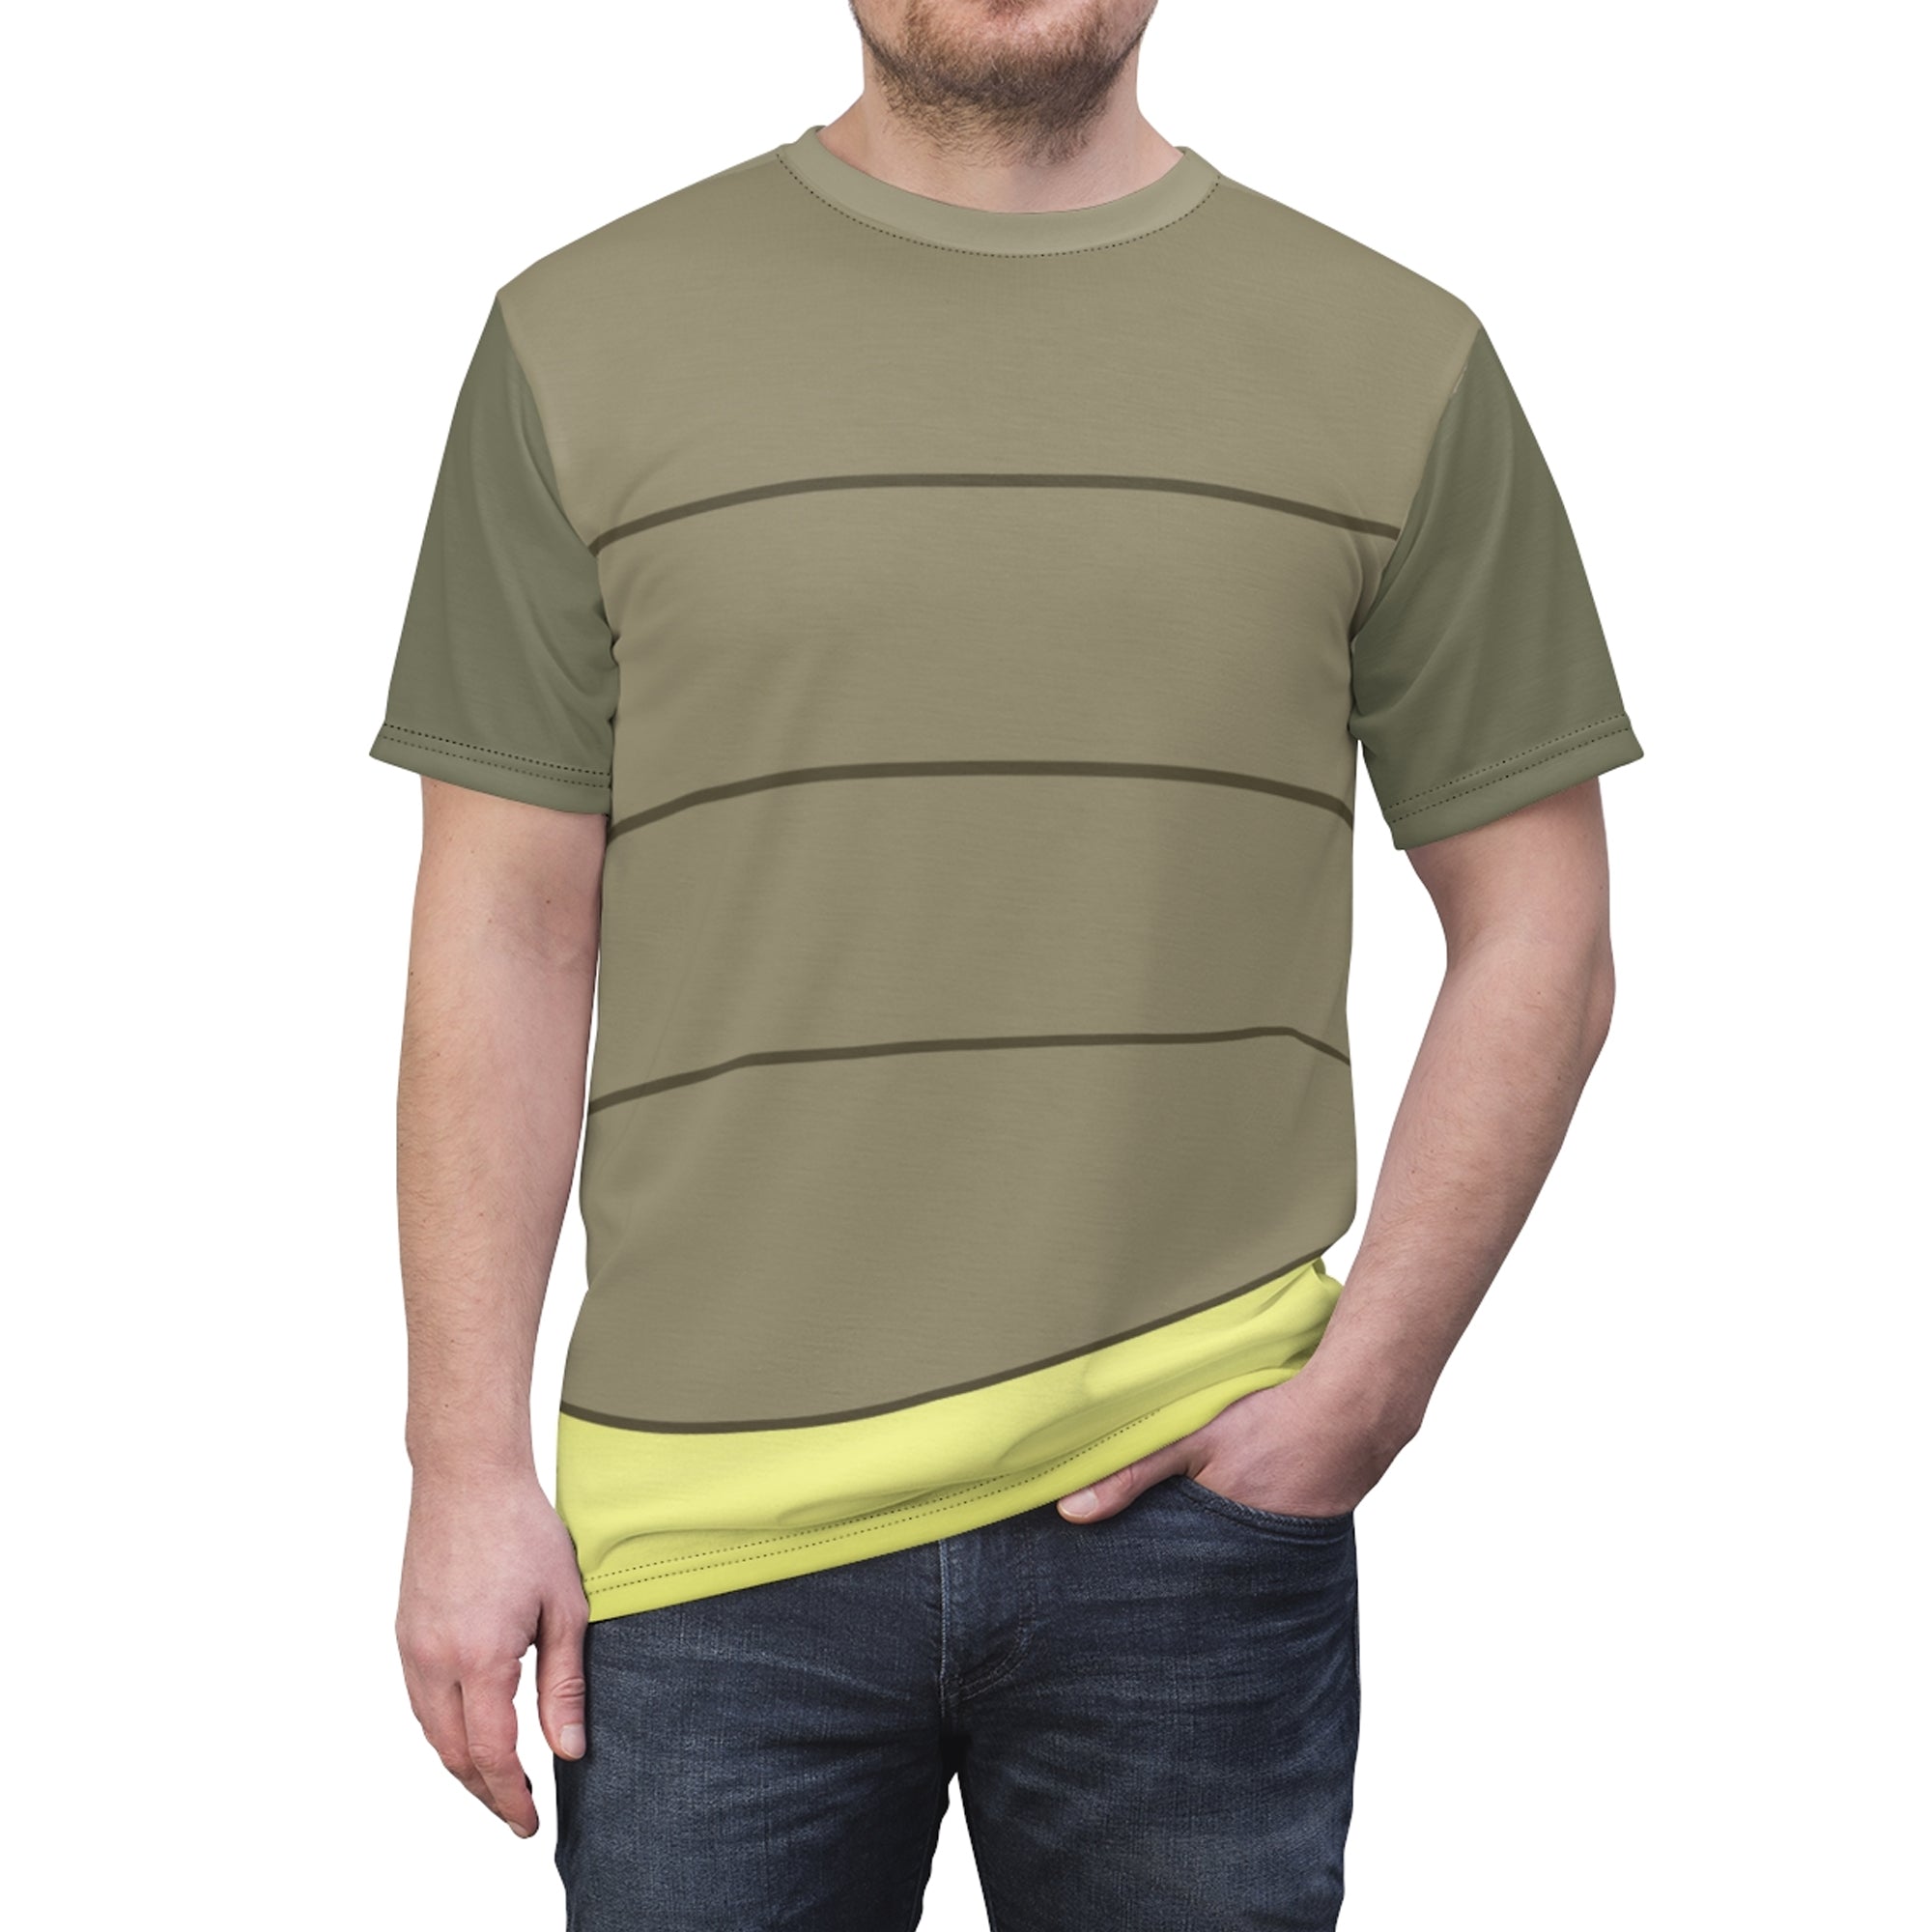 Ray The Firefly The Princess And The Frog Costume T-shirt For Men